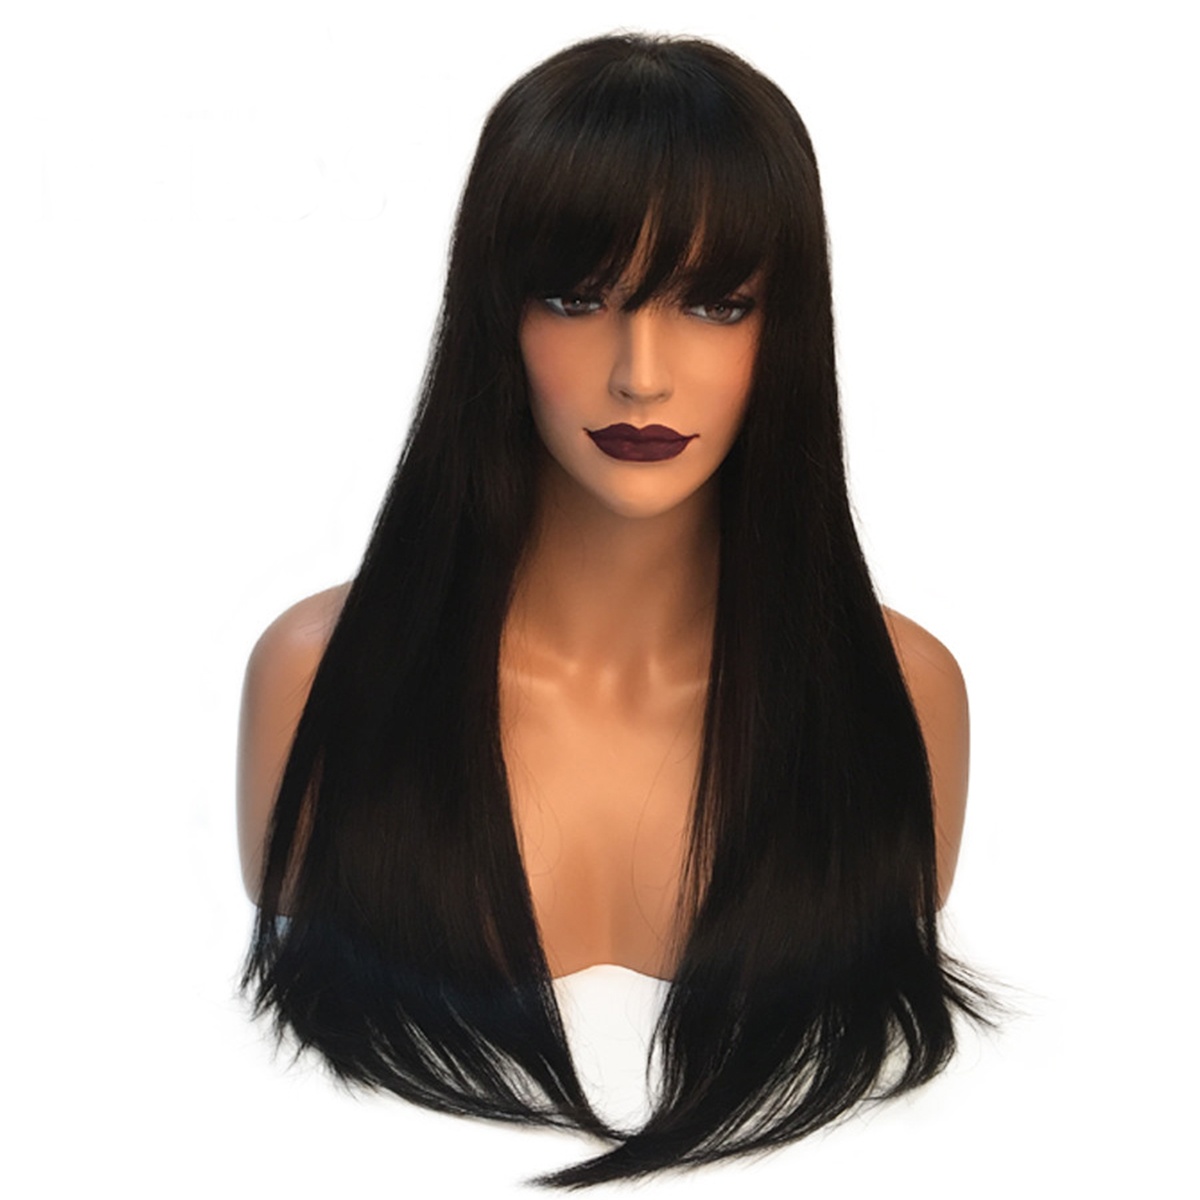 ISABEL Peruvian Hair Silky Straight Full Lace Human Hair Wigs With Thickness Bangs Glueless Human Hair Wigs For Black Women